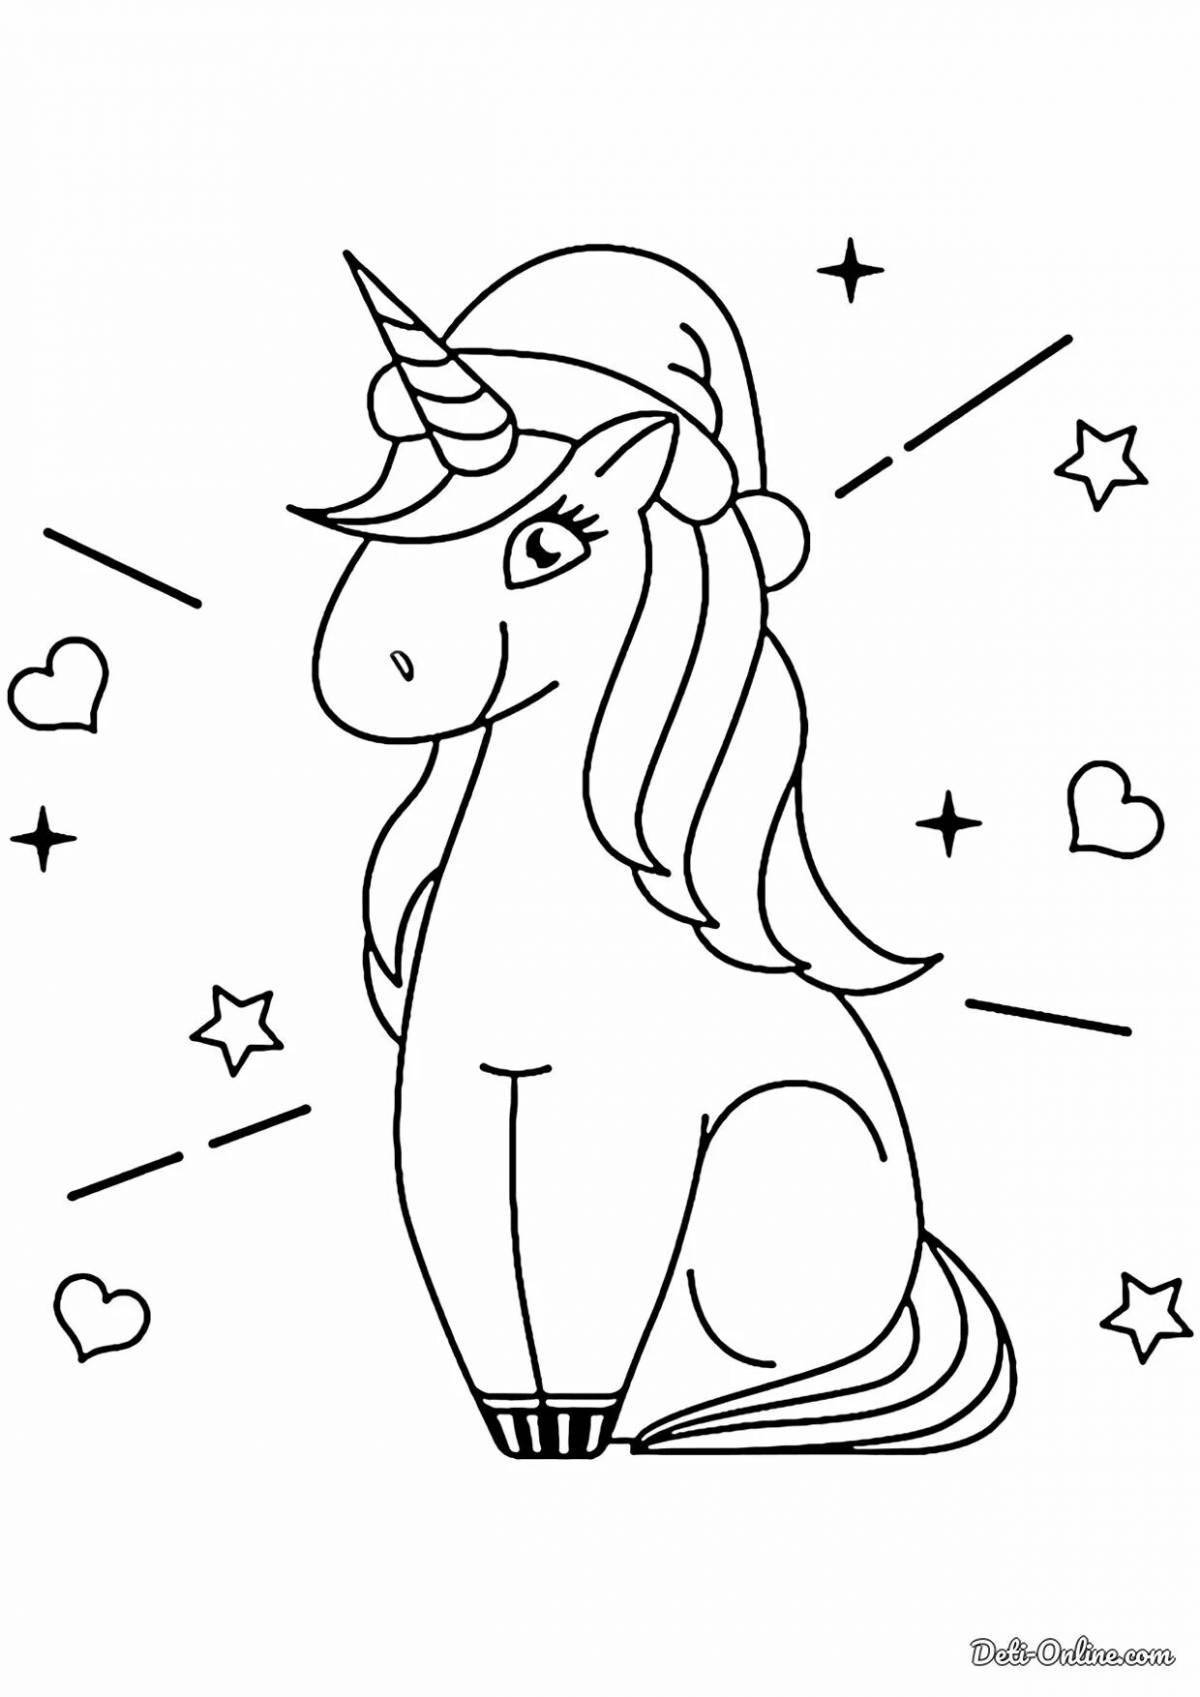 Gorgeous Christmas unicorn coloring page